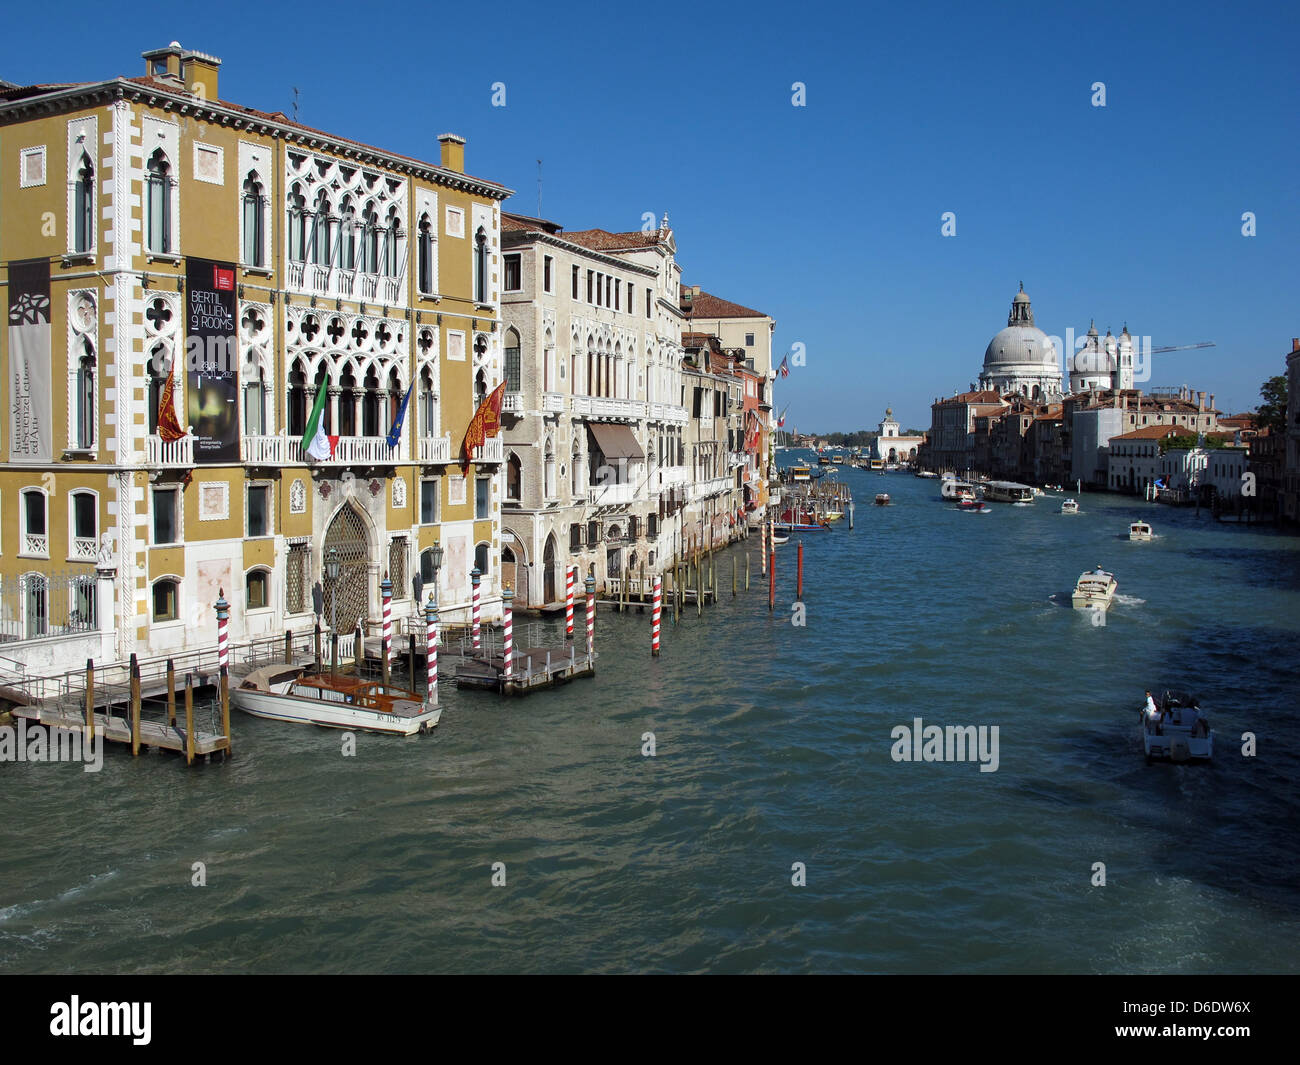 A view of the Galleria dell'Accademia (L) situated at the Canal Grande is pictured from the bridge Ponte dell'Accademia in Venice, Italy, 09 September 2012. Photo: Jens Kalaene Stock Photo